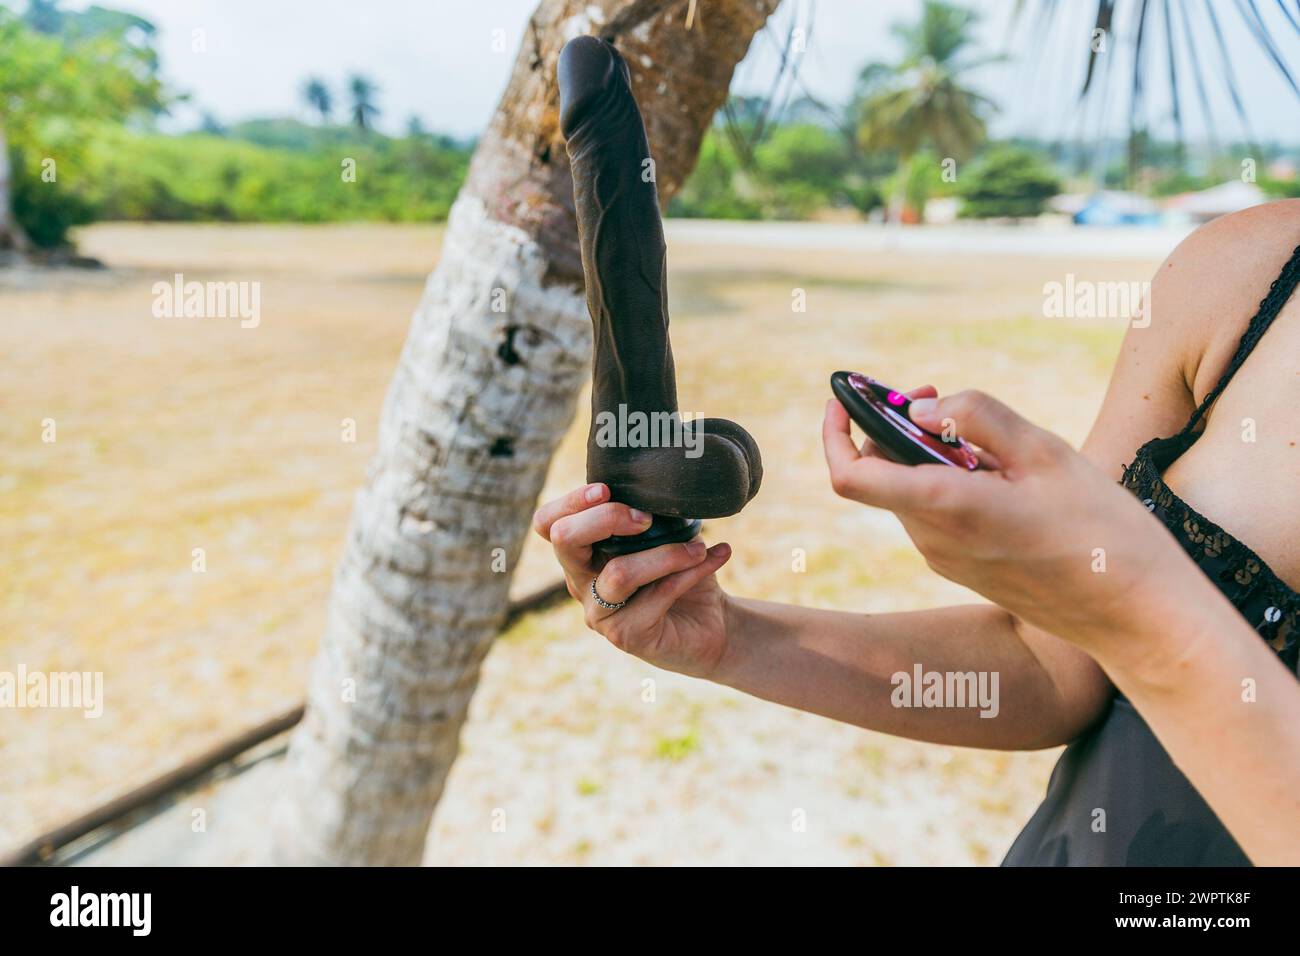 Close-up of a woman trying out a penis-shaped vibrator on a tropical beach Stock Photo